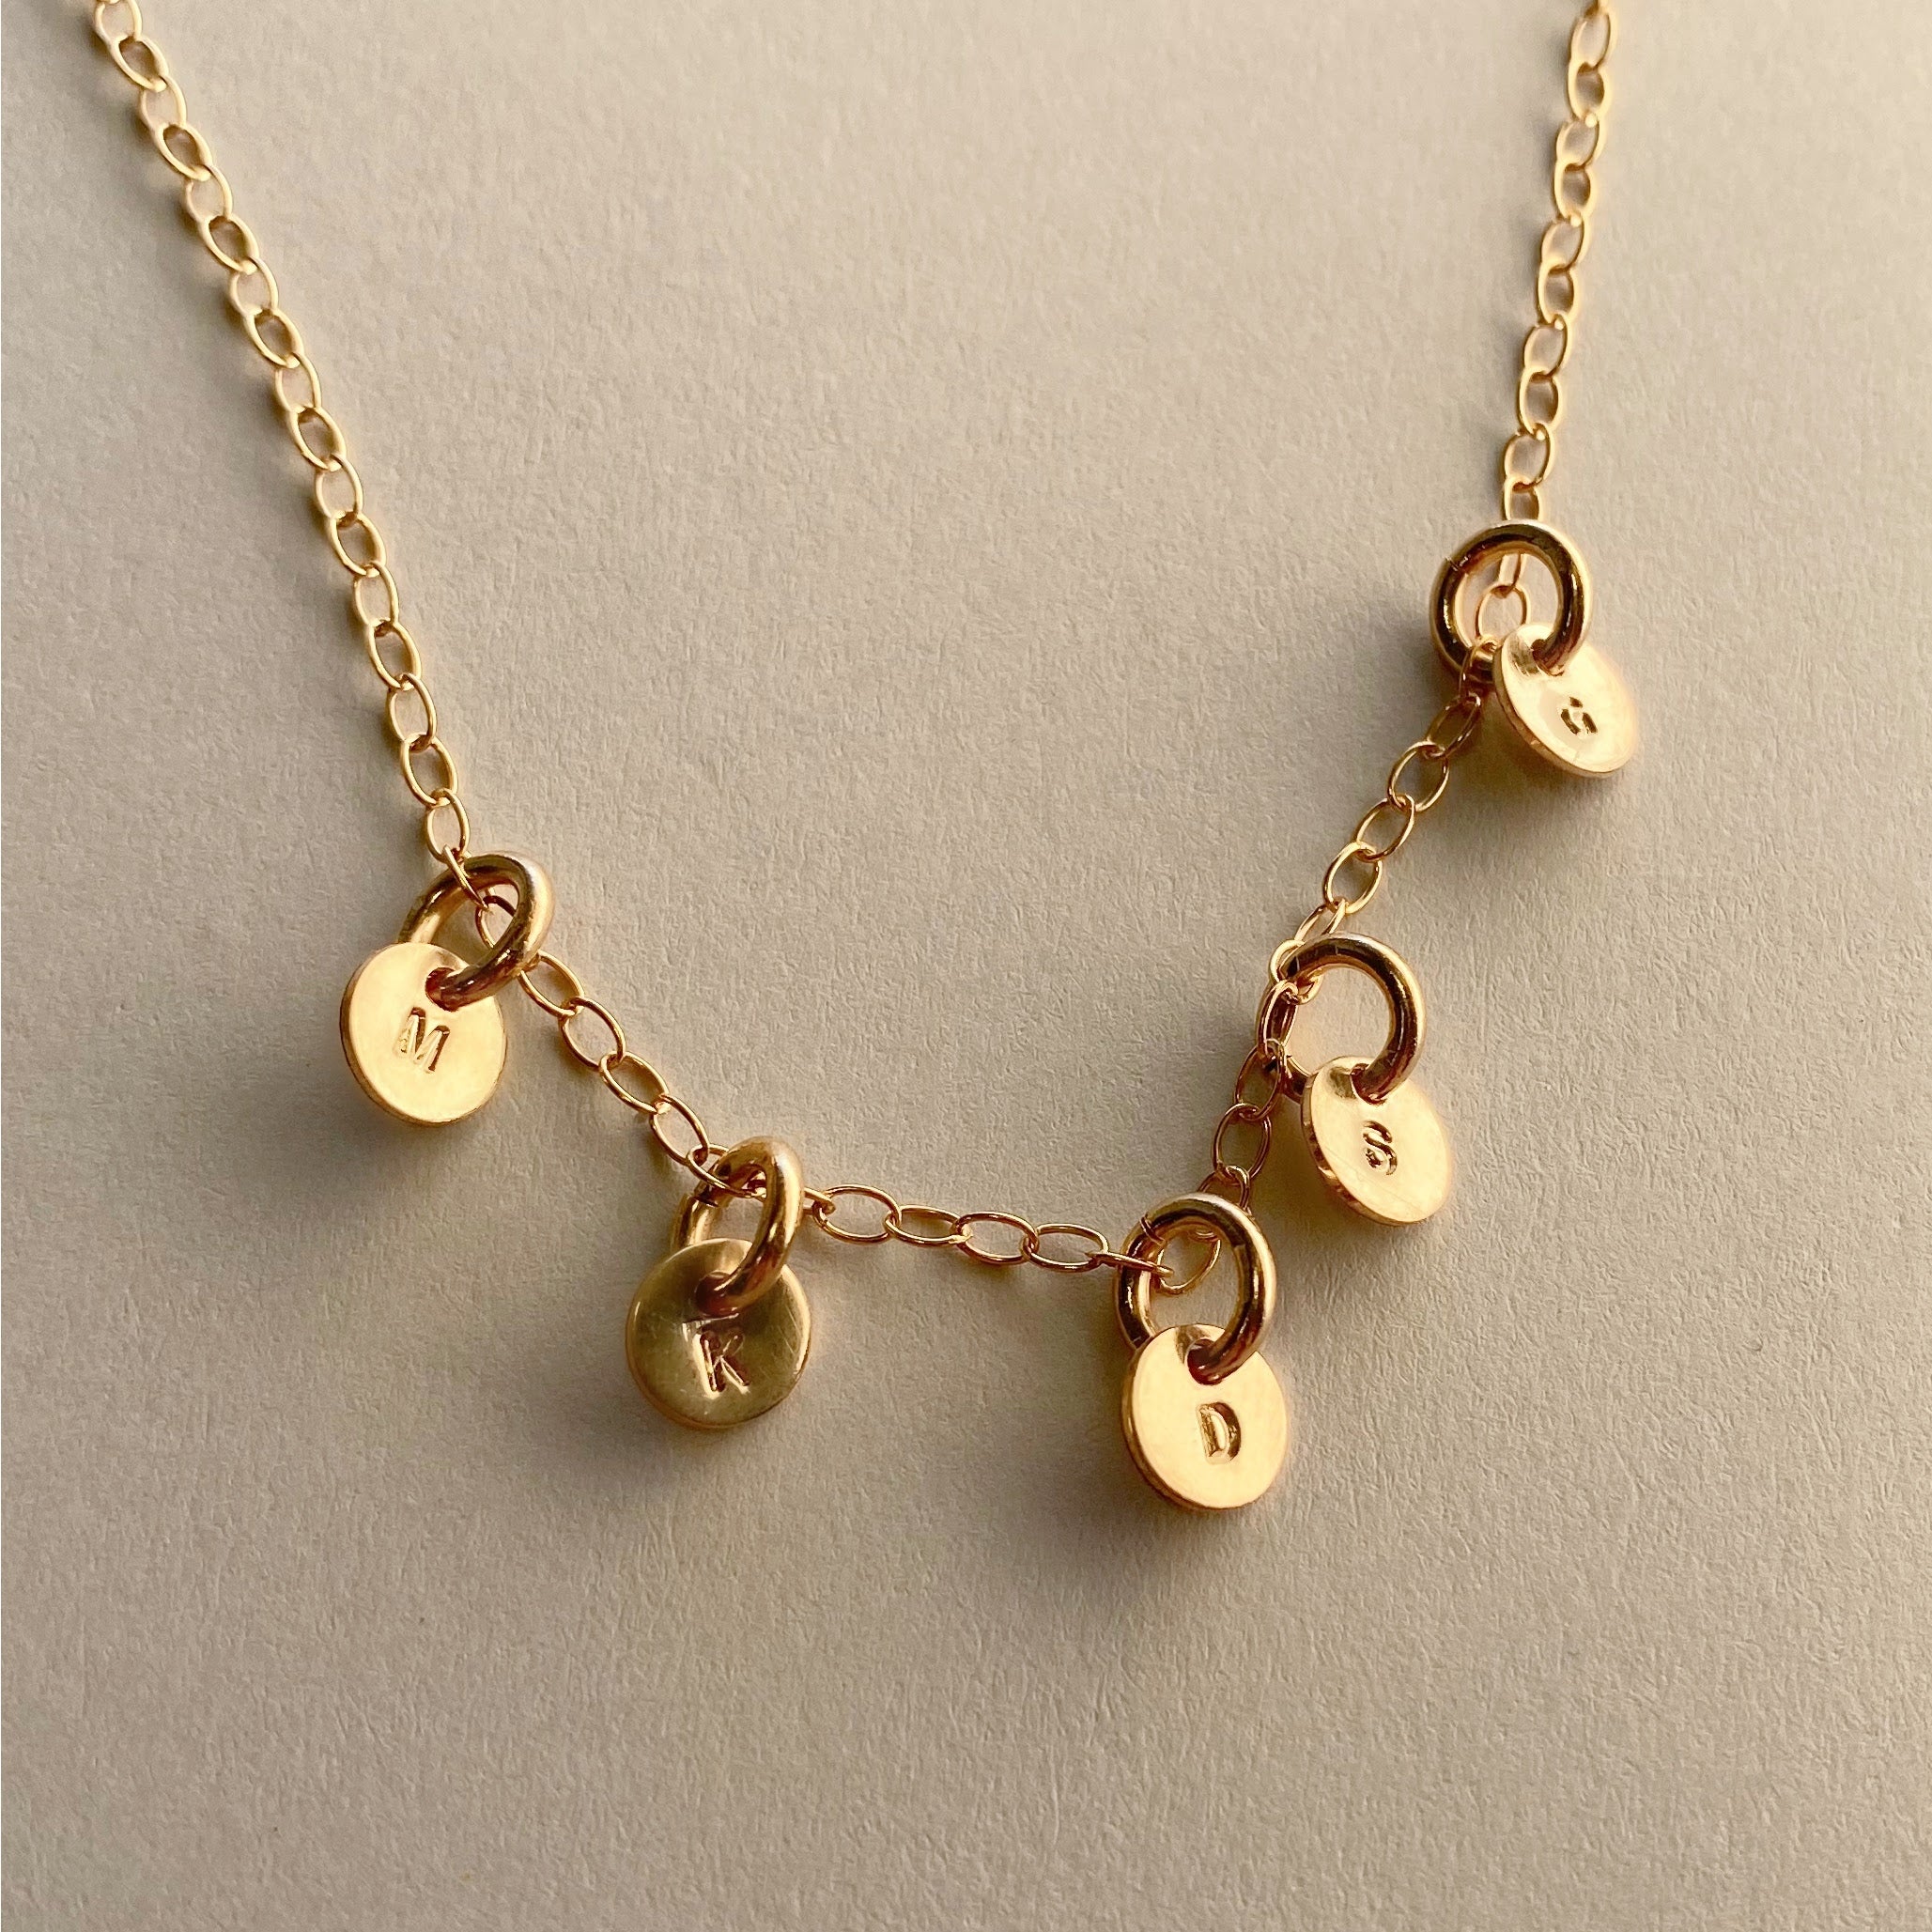 Buy Gold Necklace, Tiny One Gold Ball Necklace, Gold Bead Necklace, Gold  Jewelry, Tiny Dot Necklace, Minimalist Gold Necklace, Bridesmaid Gift  Online in India - Etsy